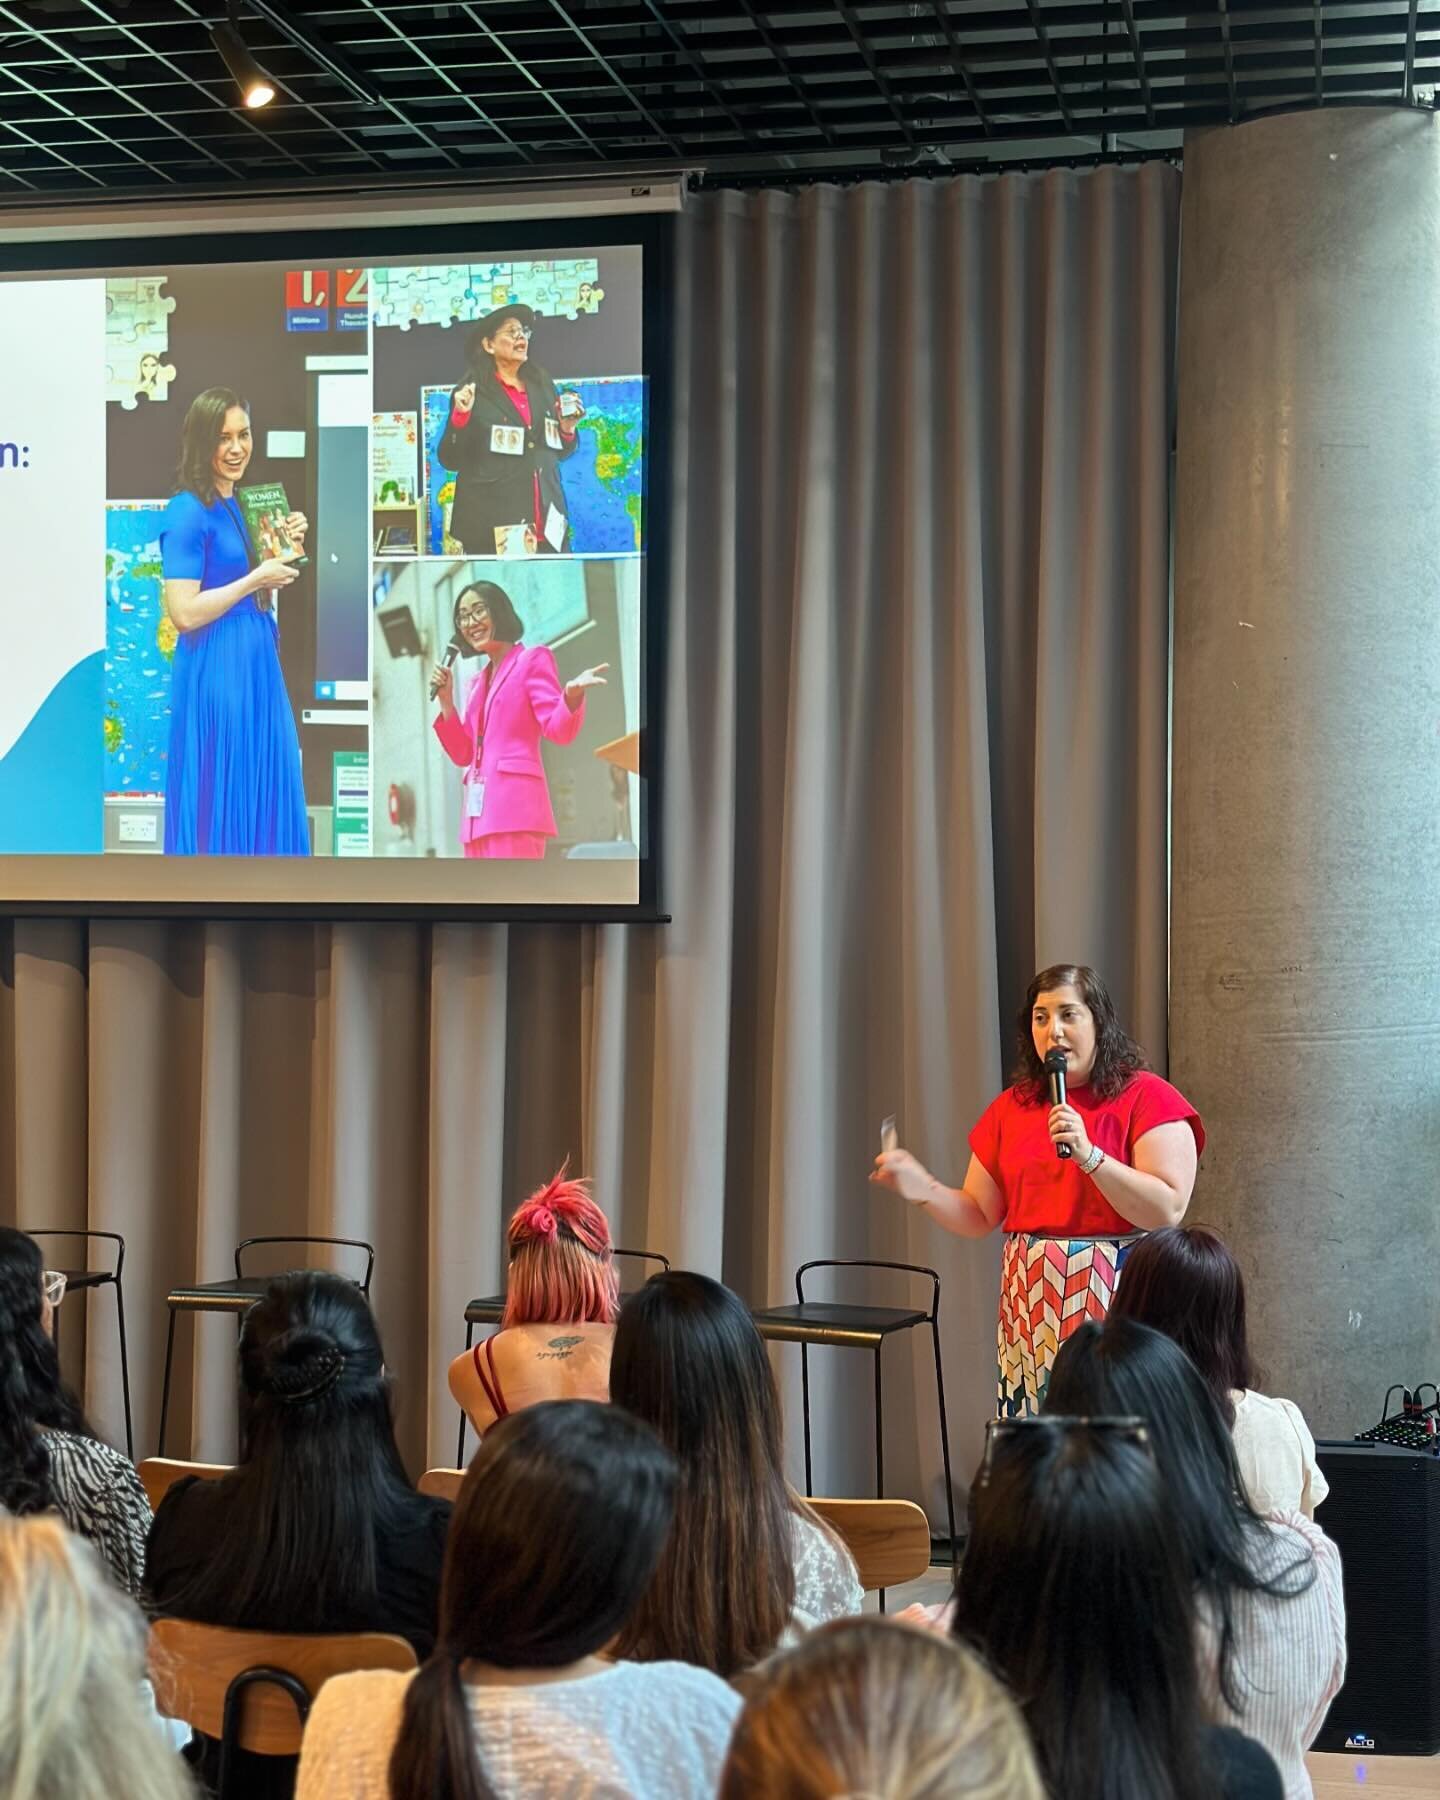 We are still on a high from the @inspiringgirlsaus IWD event last week! Here is @drcelingelgec sharing how people can get involved. We are so thrilled to be a part of this amazing program. There are so many ways you can get involved. Head over to the